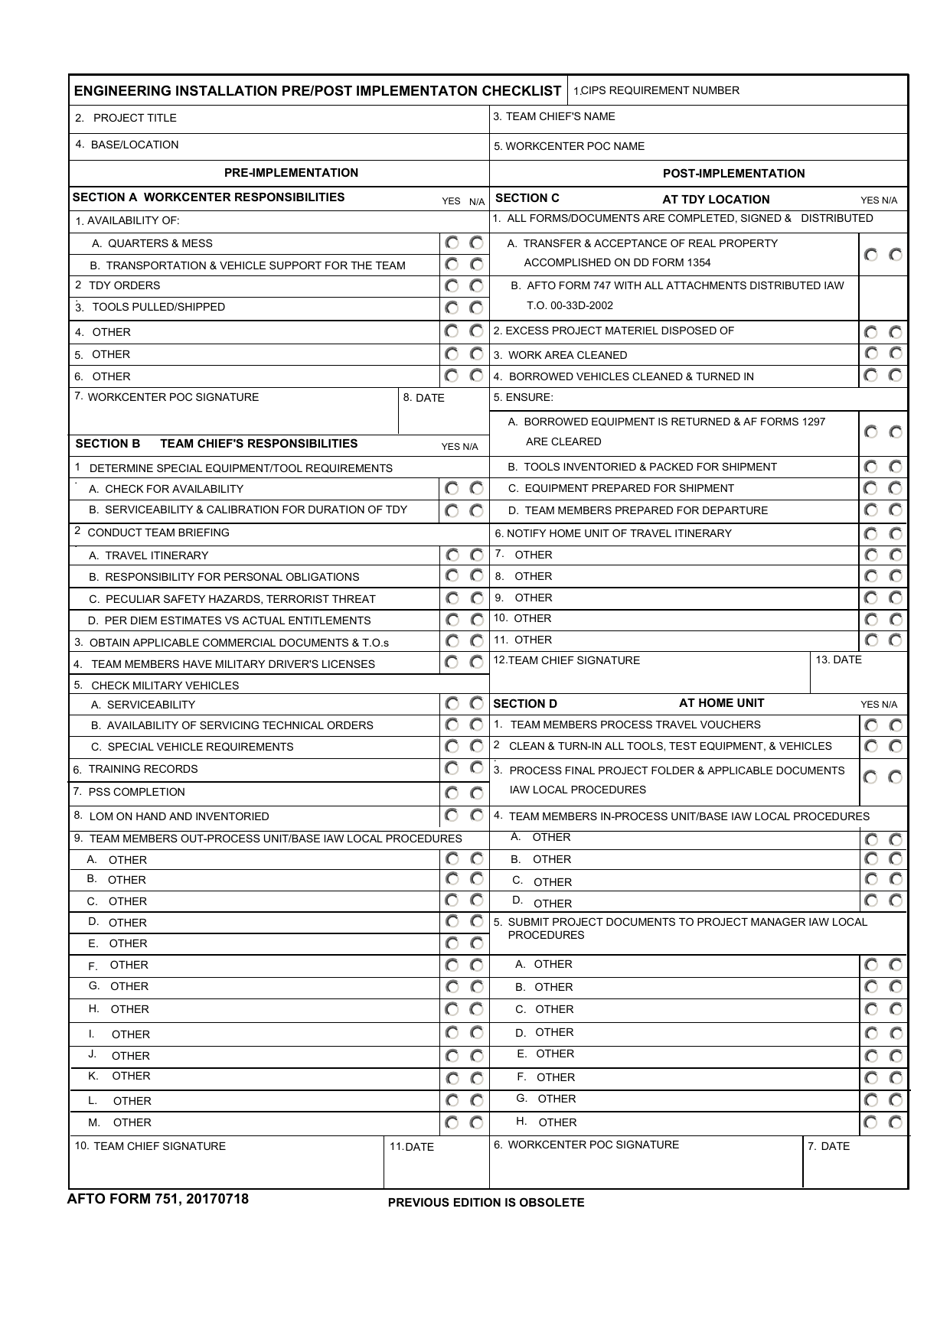 AFTO Form 751 Engineering Installation Pre / Pose Implementation Checklist, Page 1